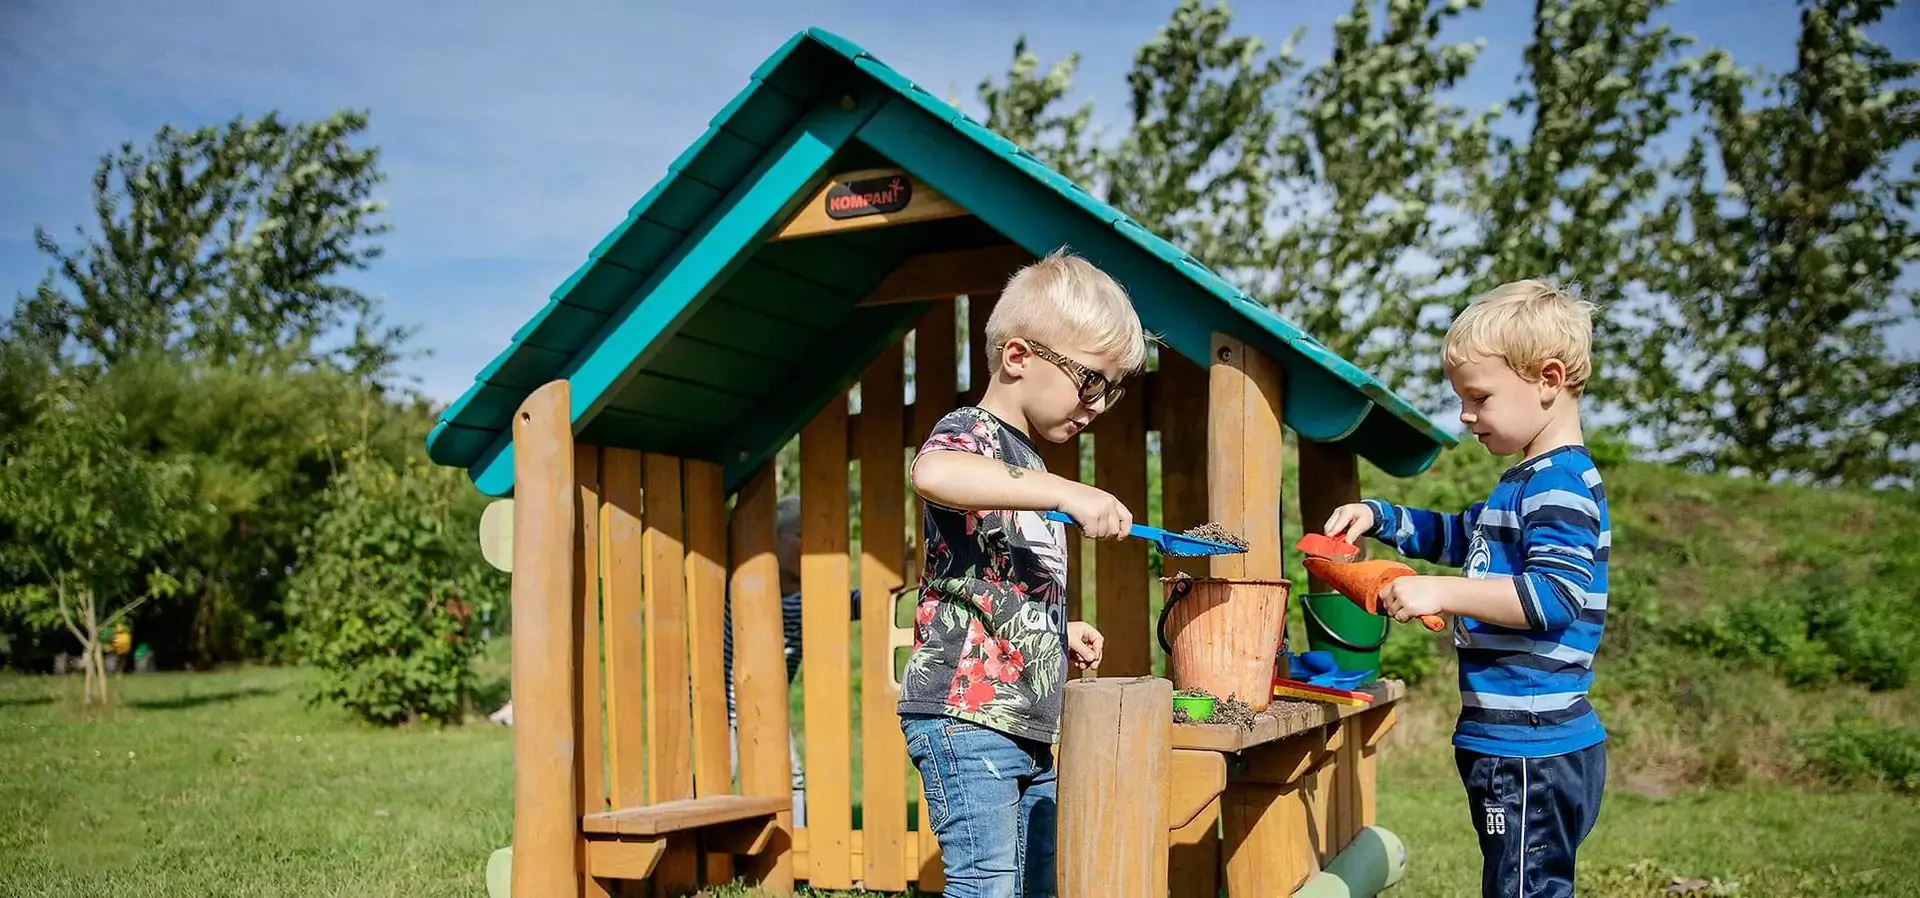 children playing on a wooden playhut playhouses playground hero image